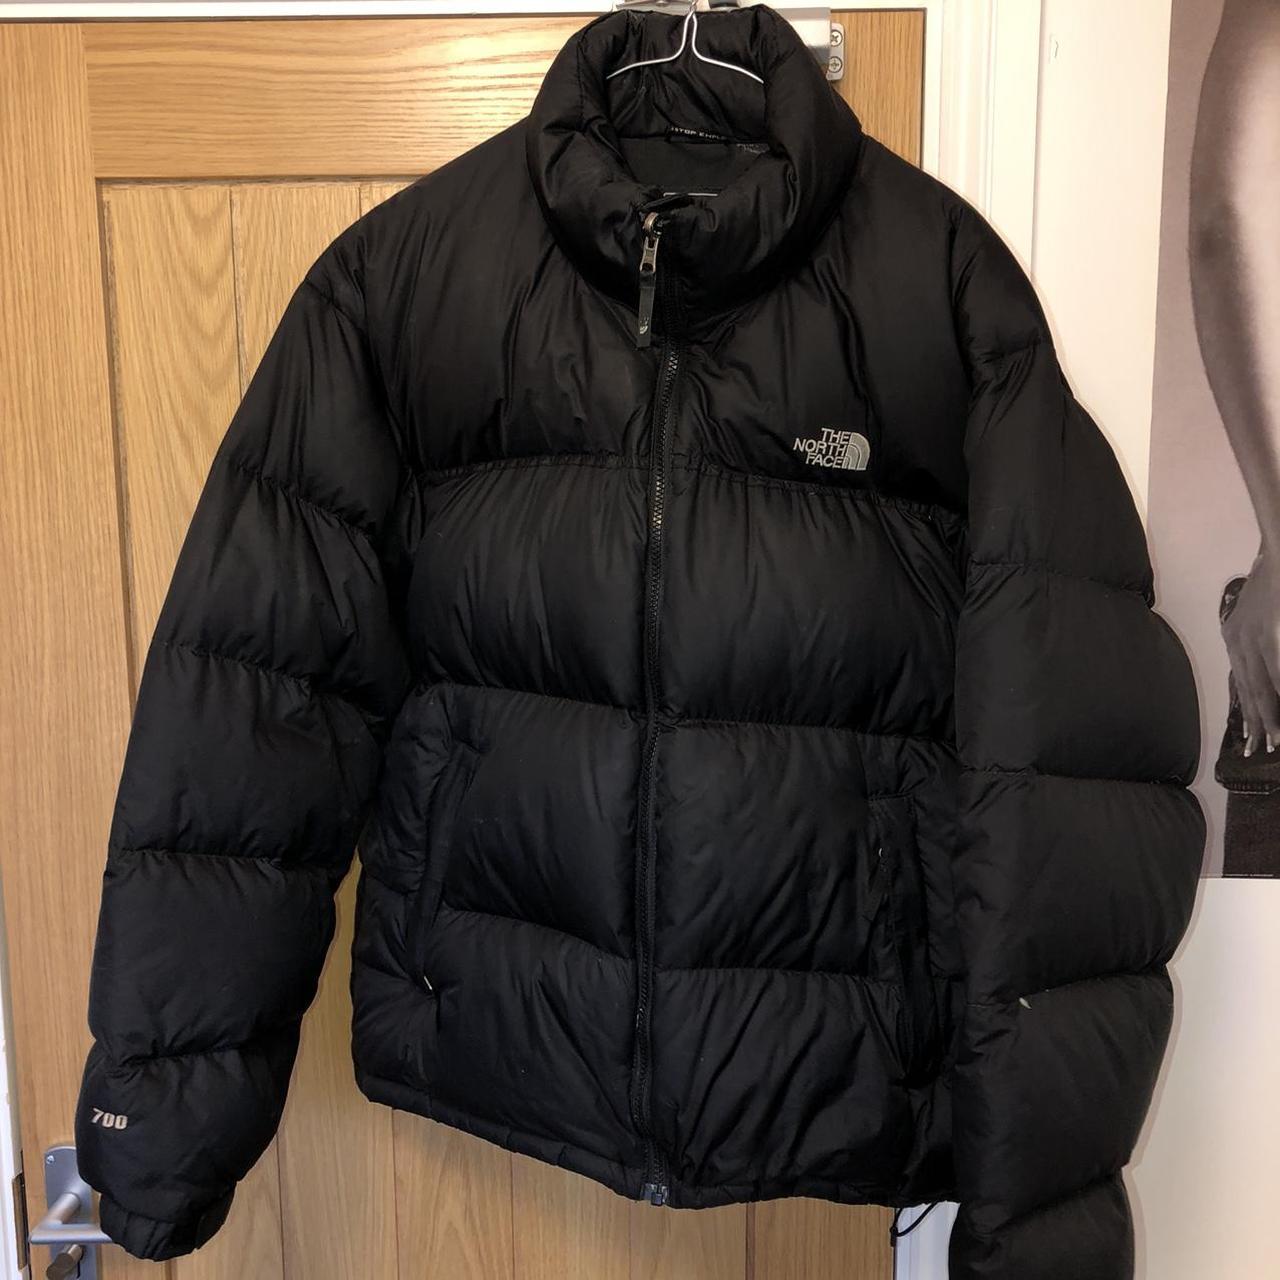 The North Face Nupste 700 puffer Size Large Colour... - Depop